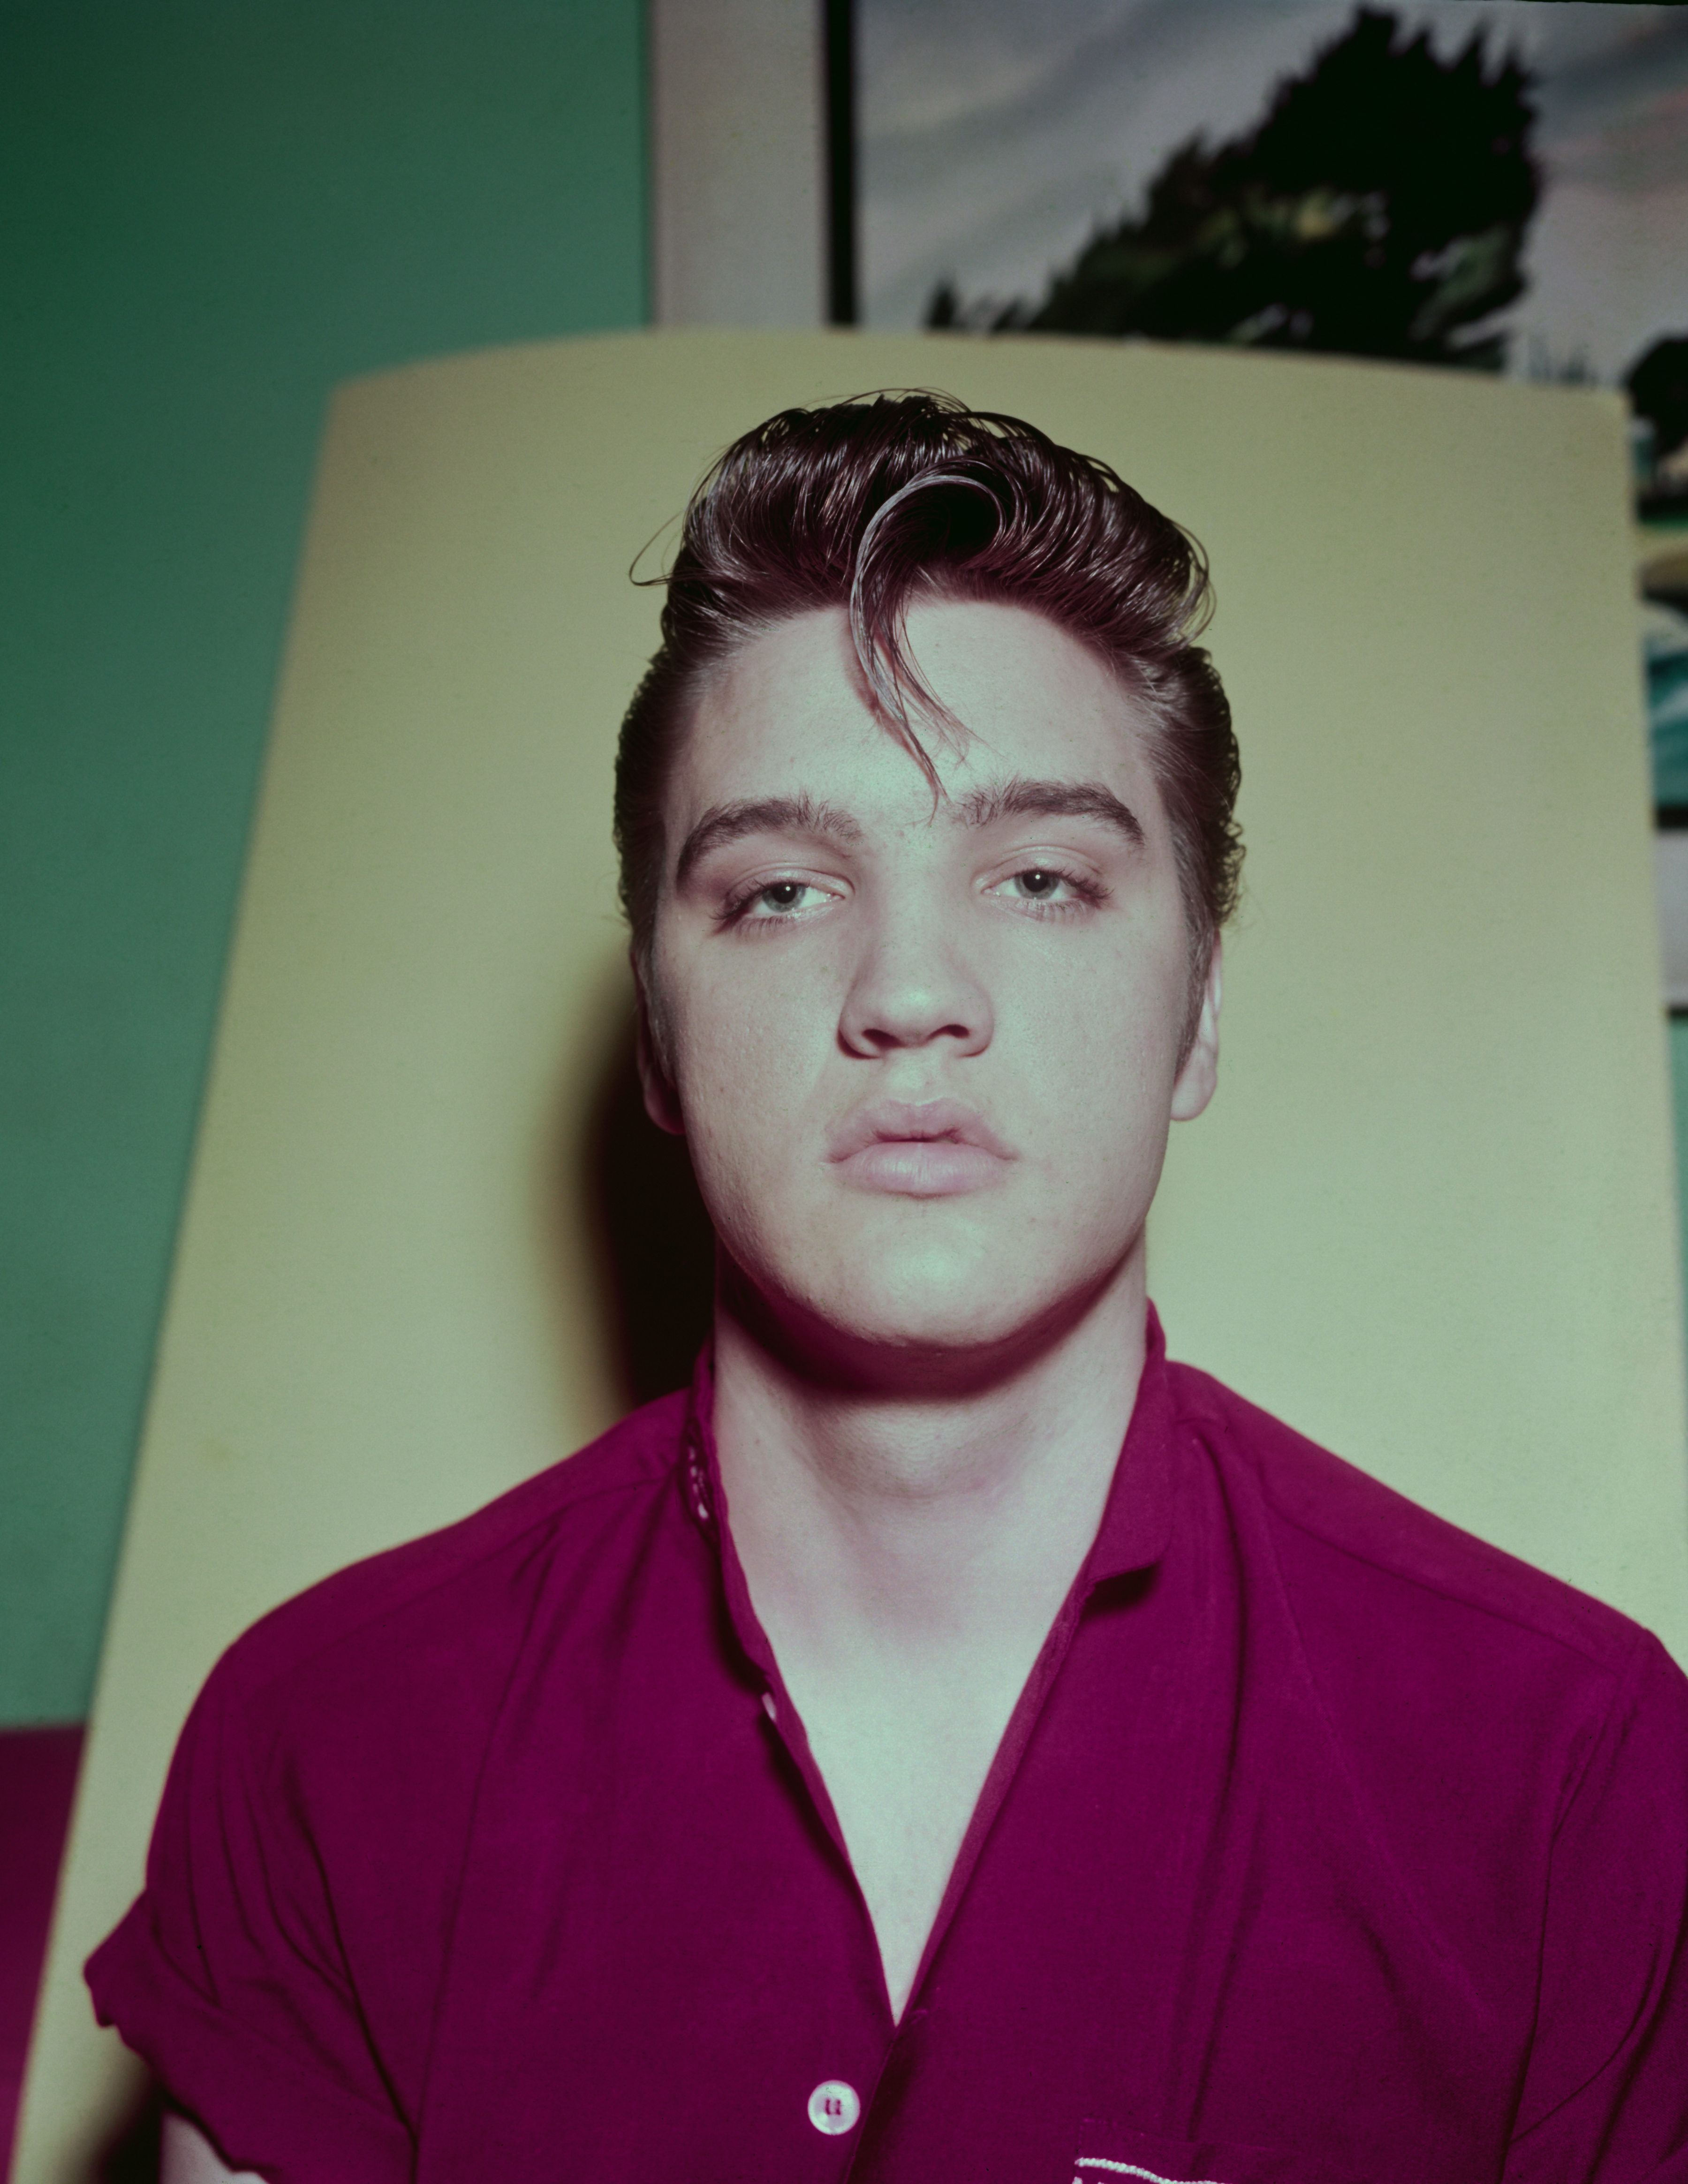 American singer and actor Elvis Presley (1935 - 1977), circa 1957. | Source: Getty Images